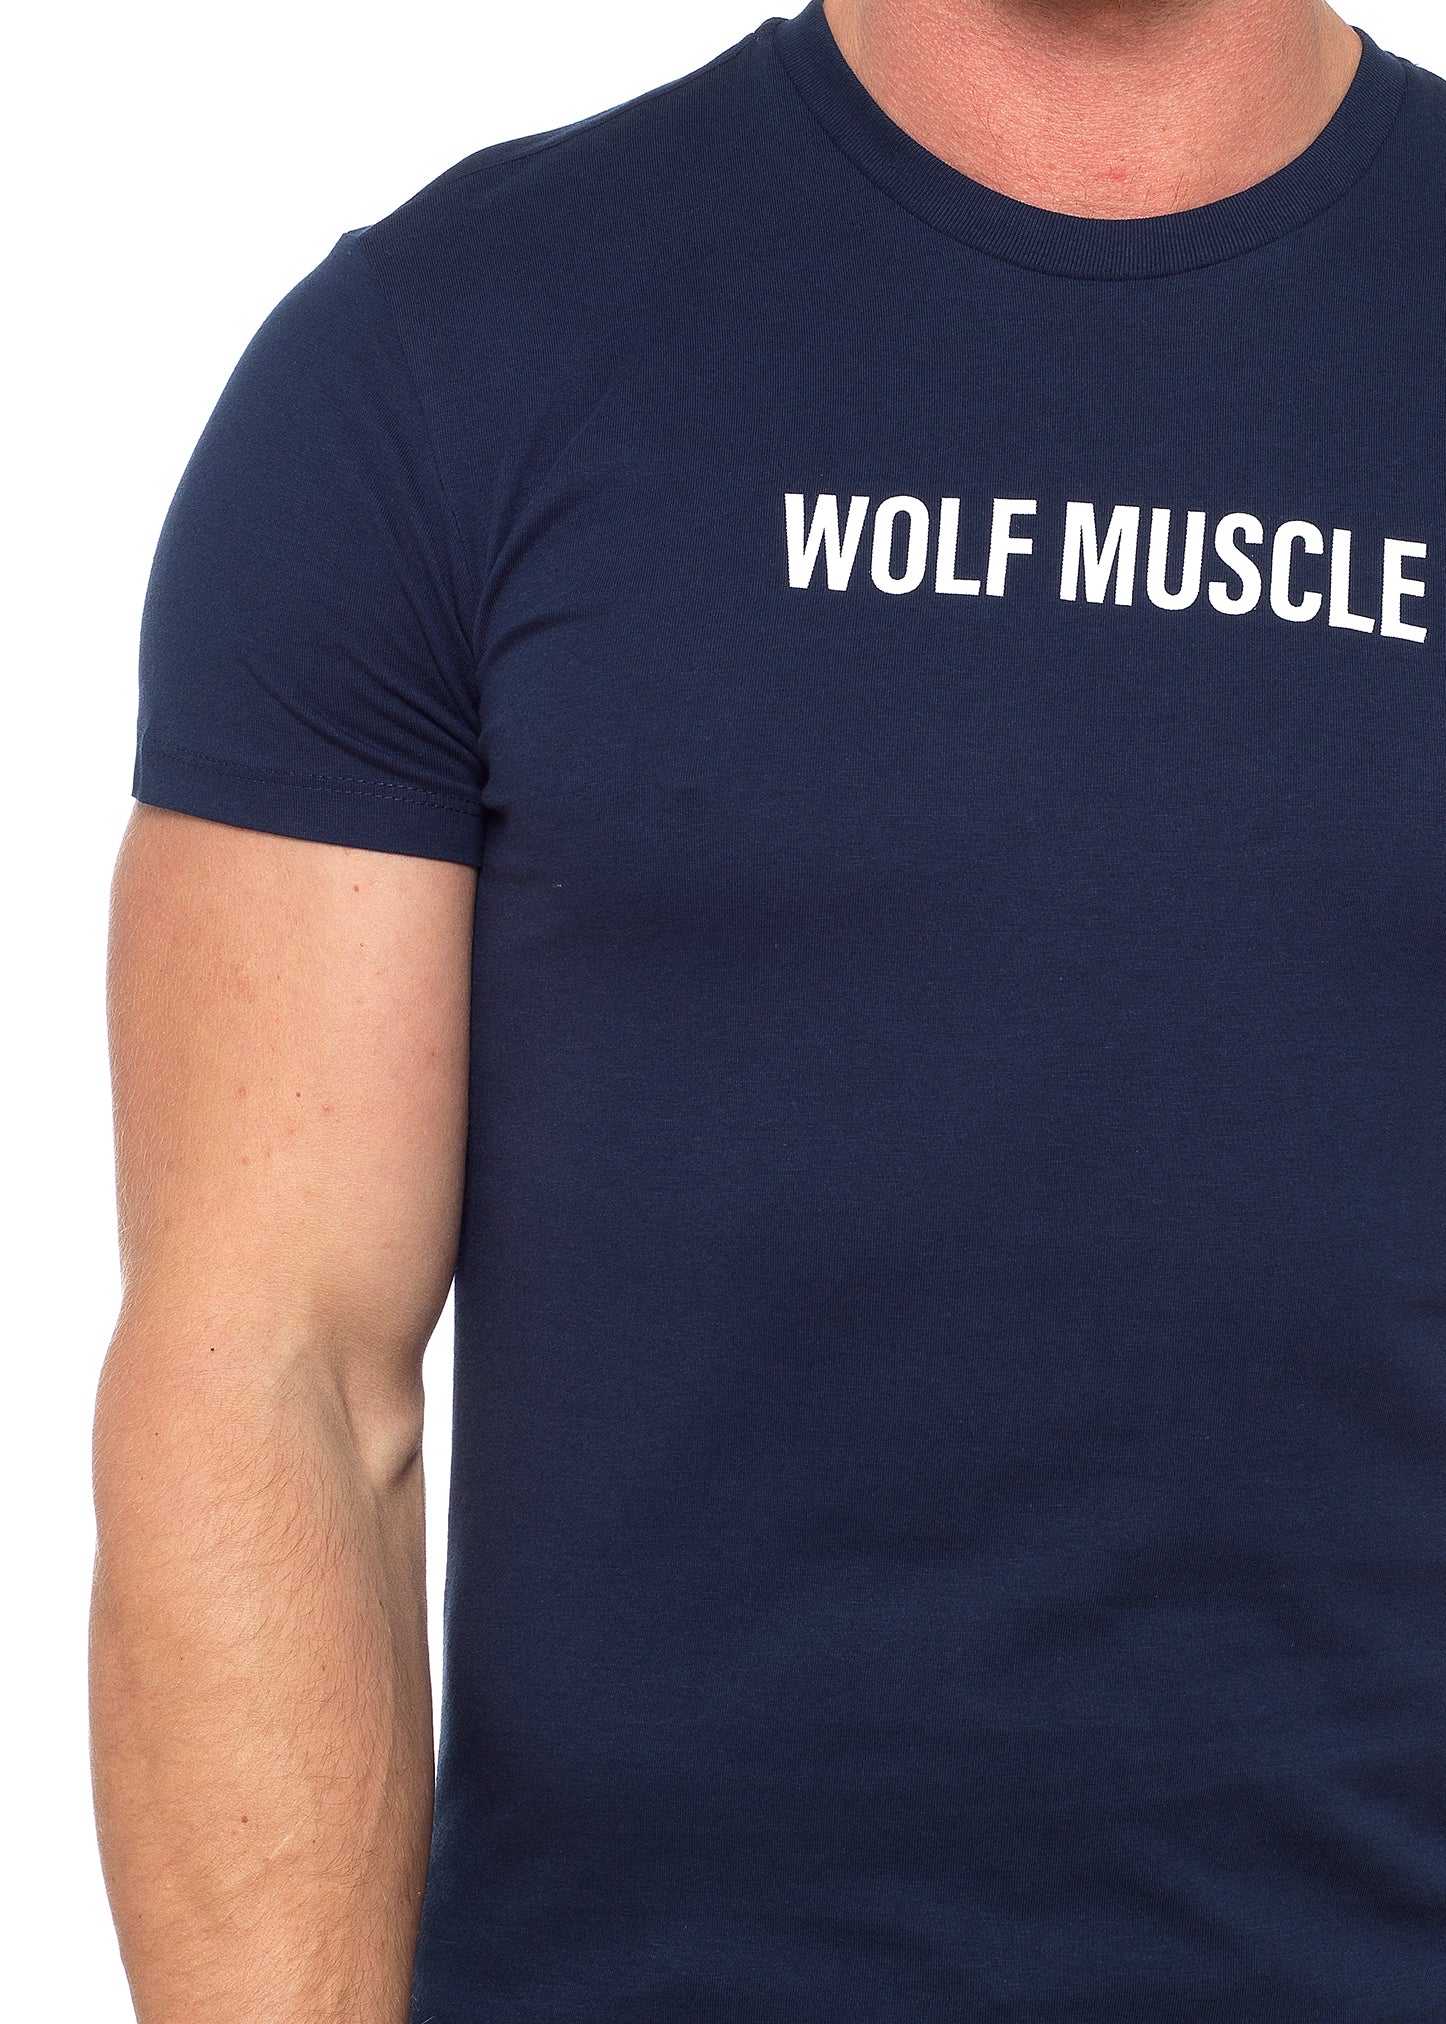 Mens Muscle Fit Navy T Shirts